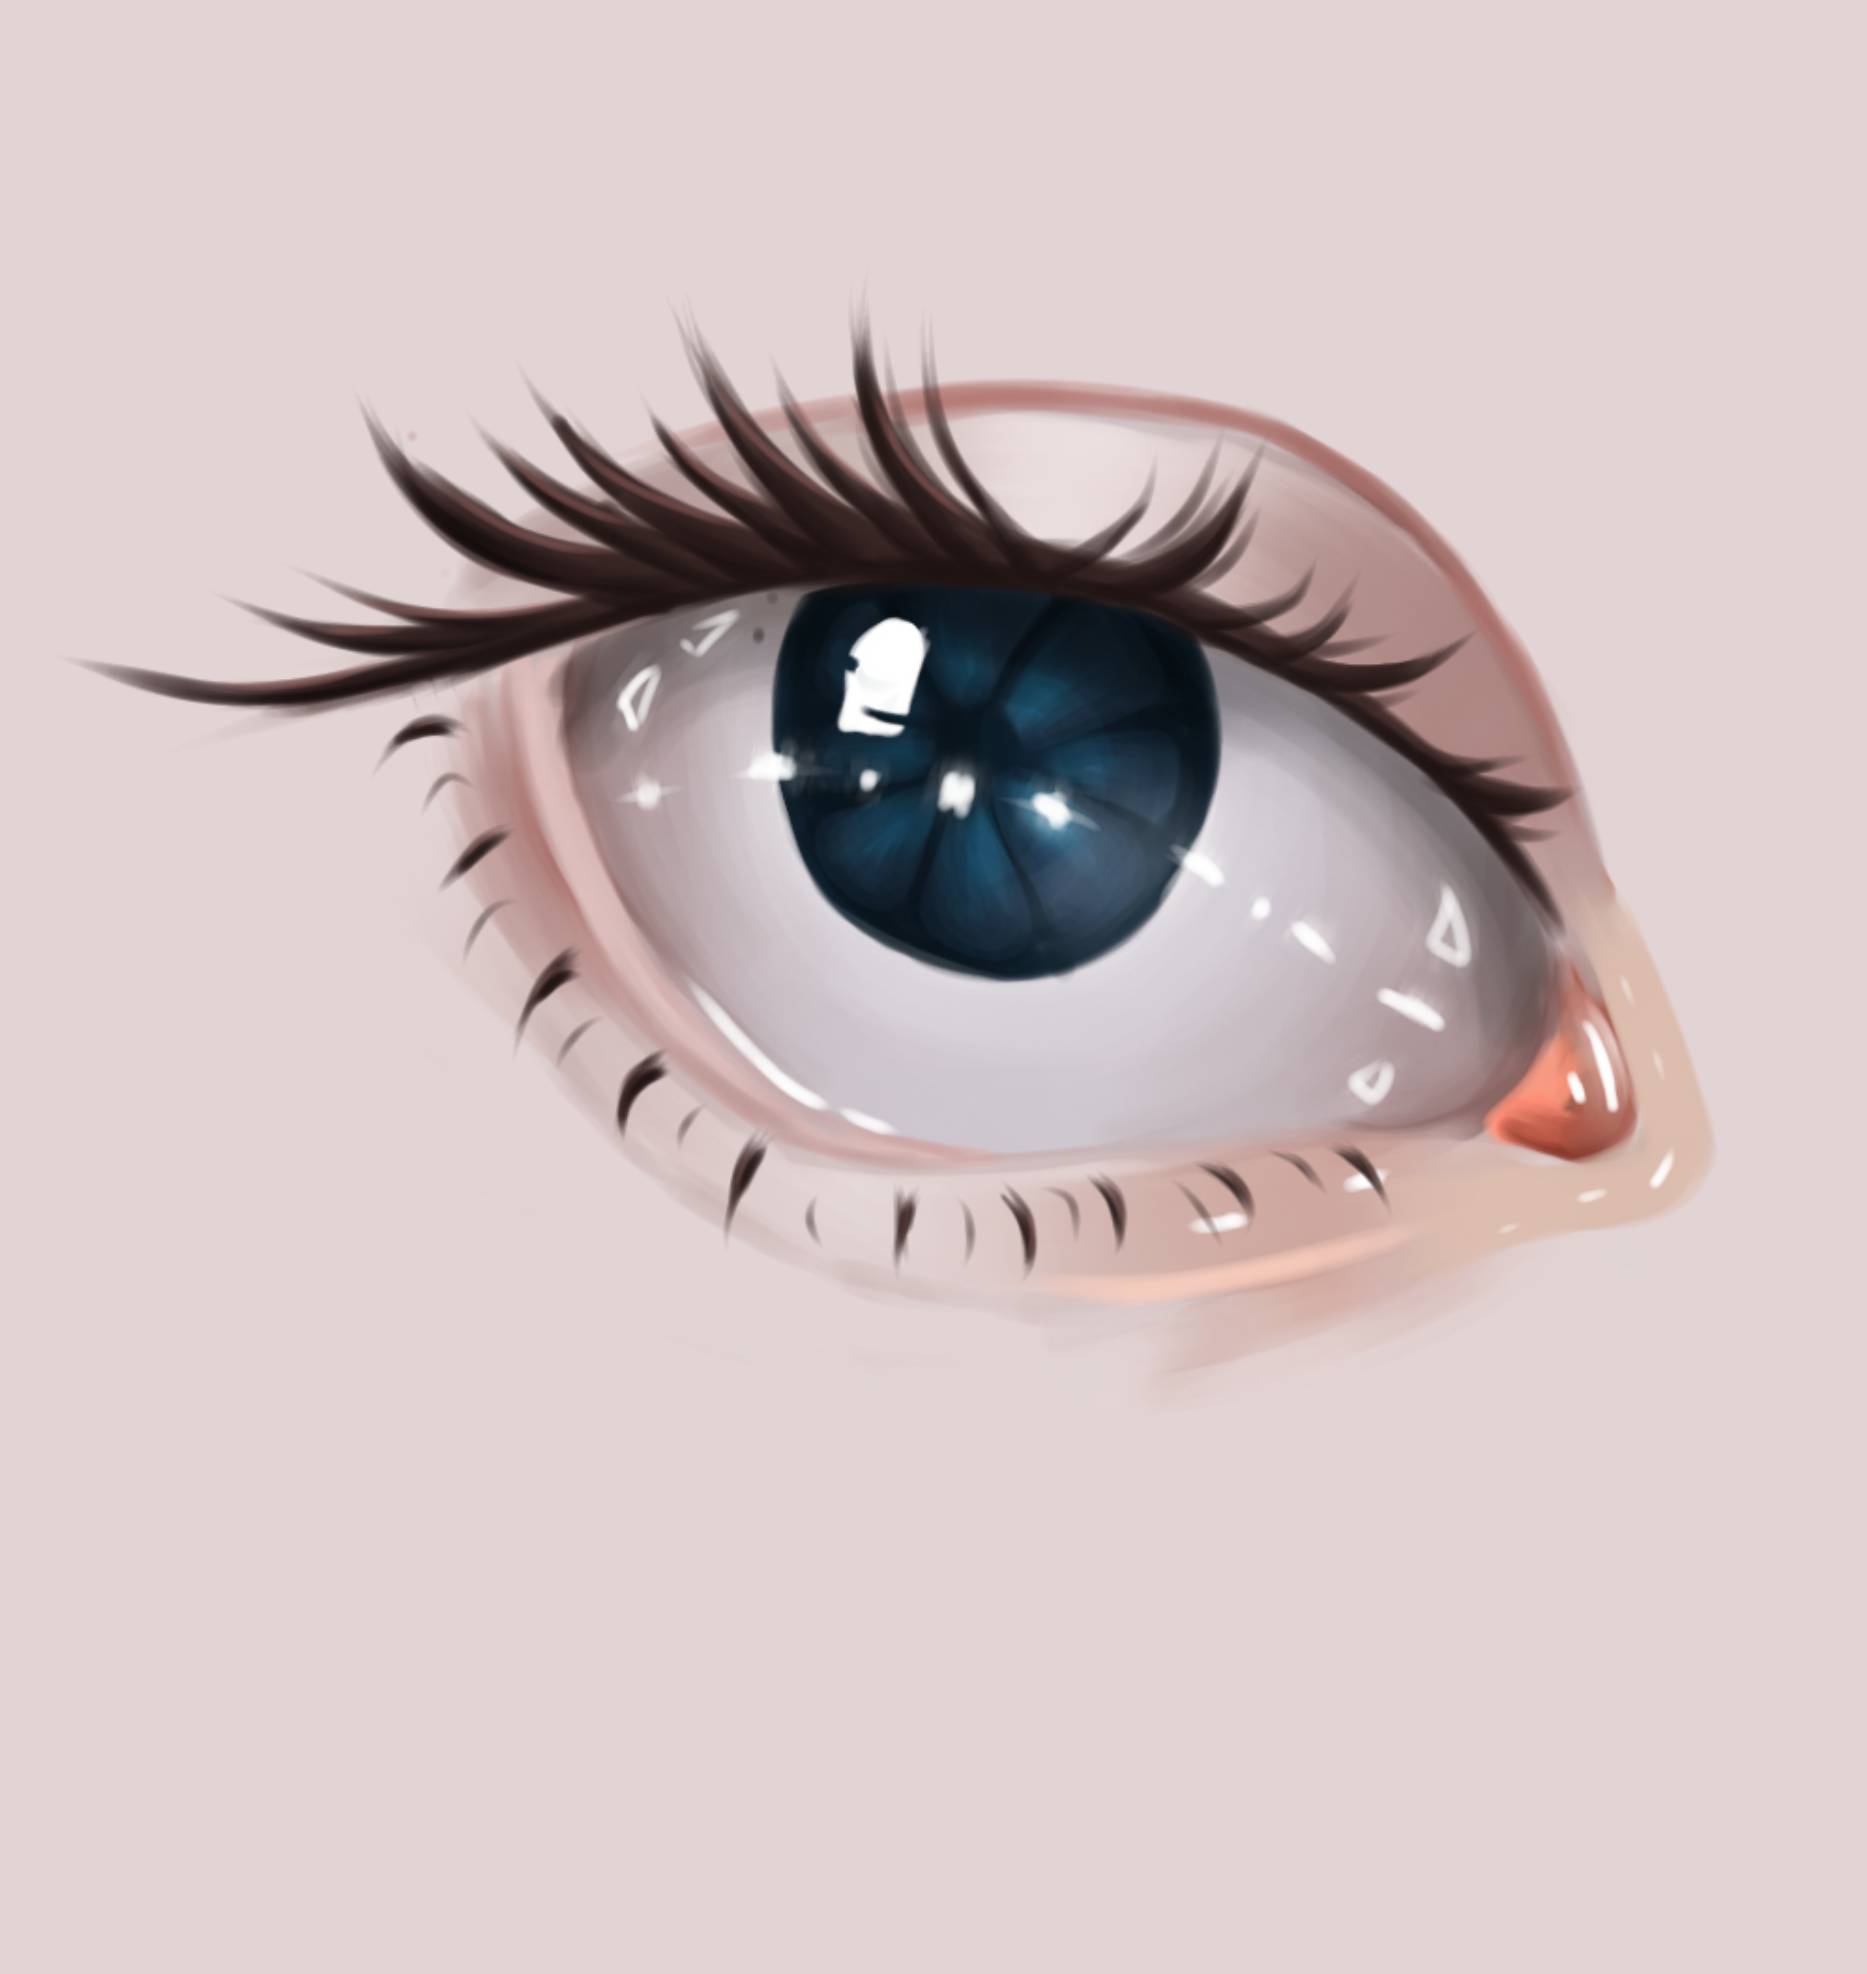 Pin by Boladão. on IBIS.  Cute eyes drawing, Makeup drawing, Eye